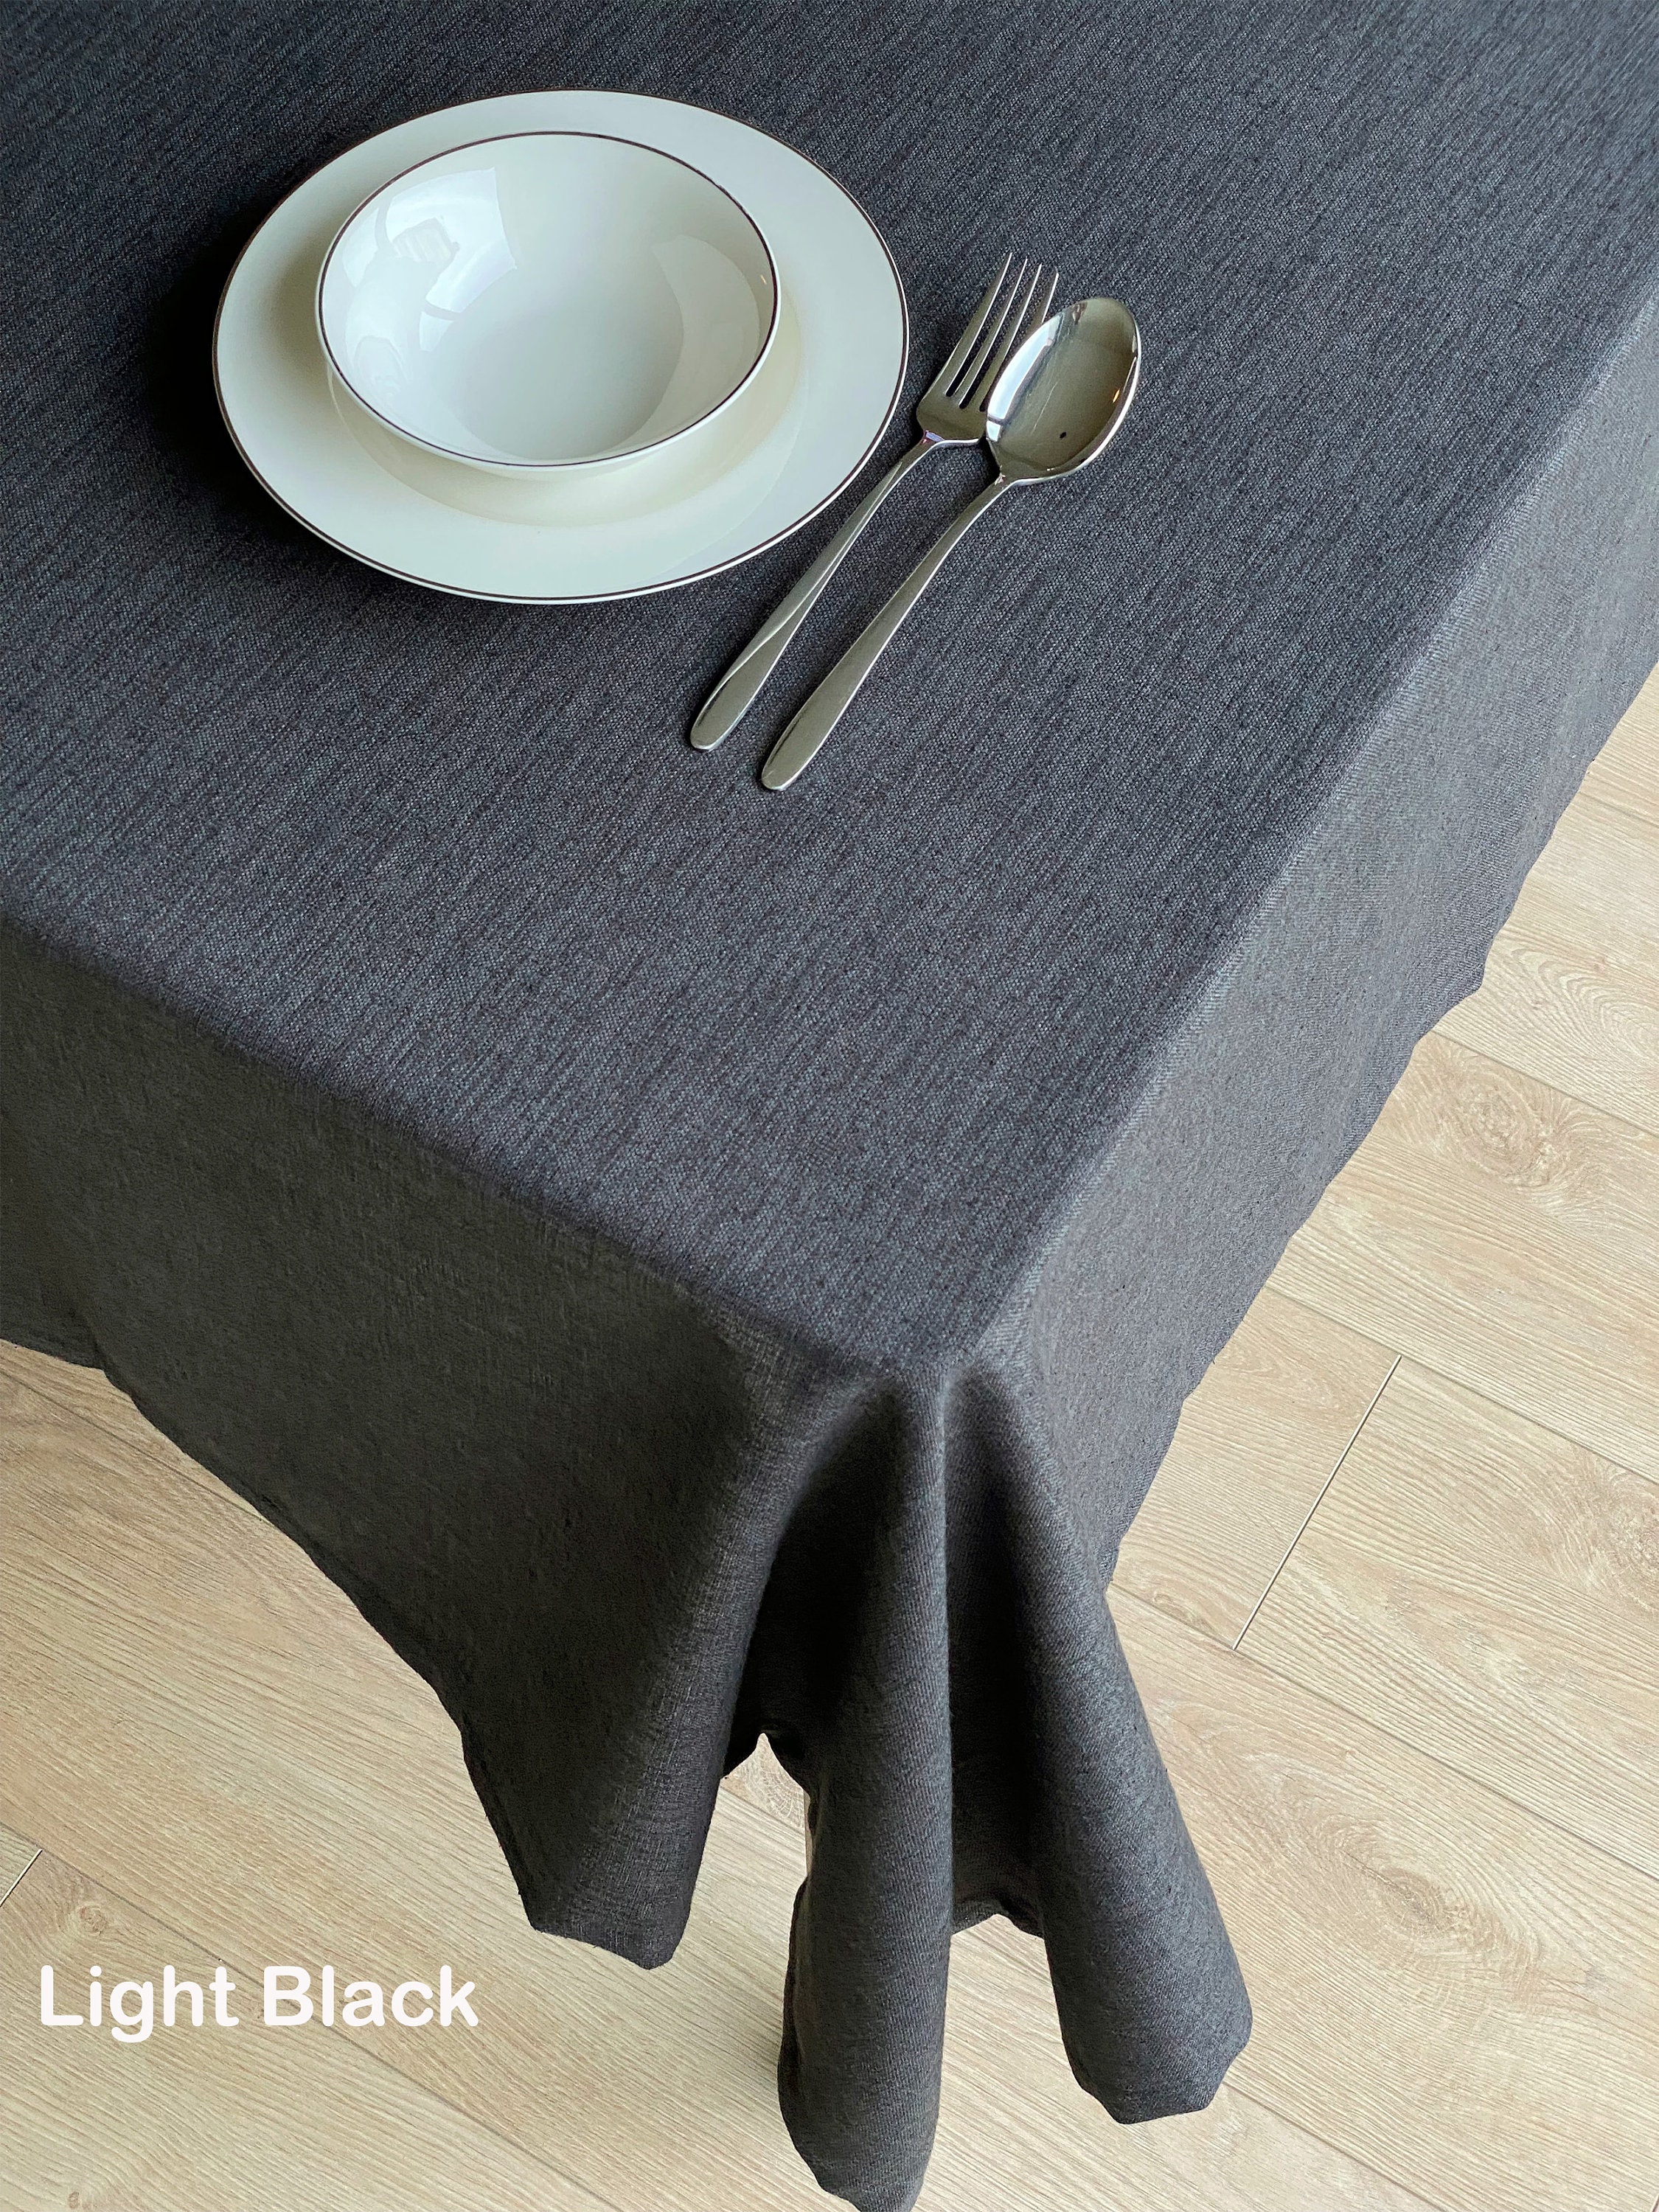 Oval Wrinkle Free Linen Tablecloth and Matching Napkins.color&custom Size  Options Round,rectangle,square,brown,cream,black,anthracite,indigo 